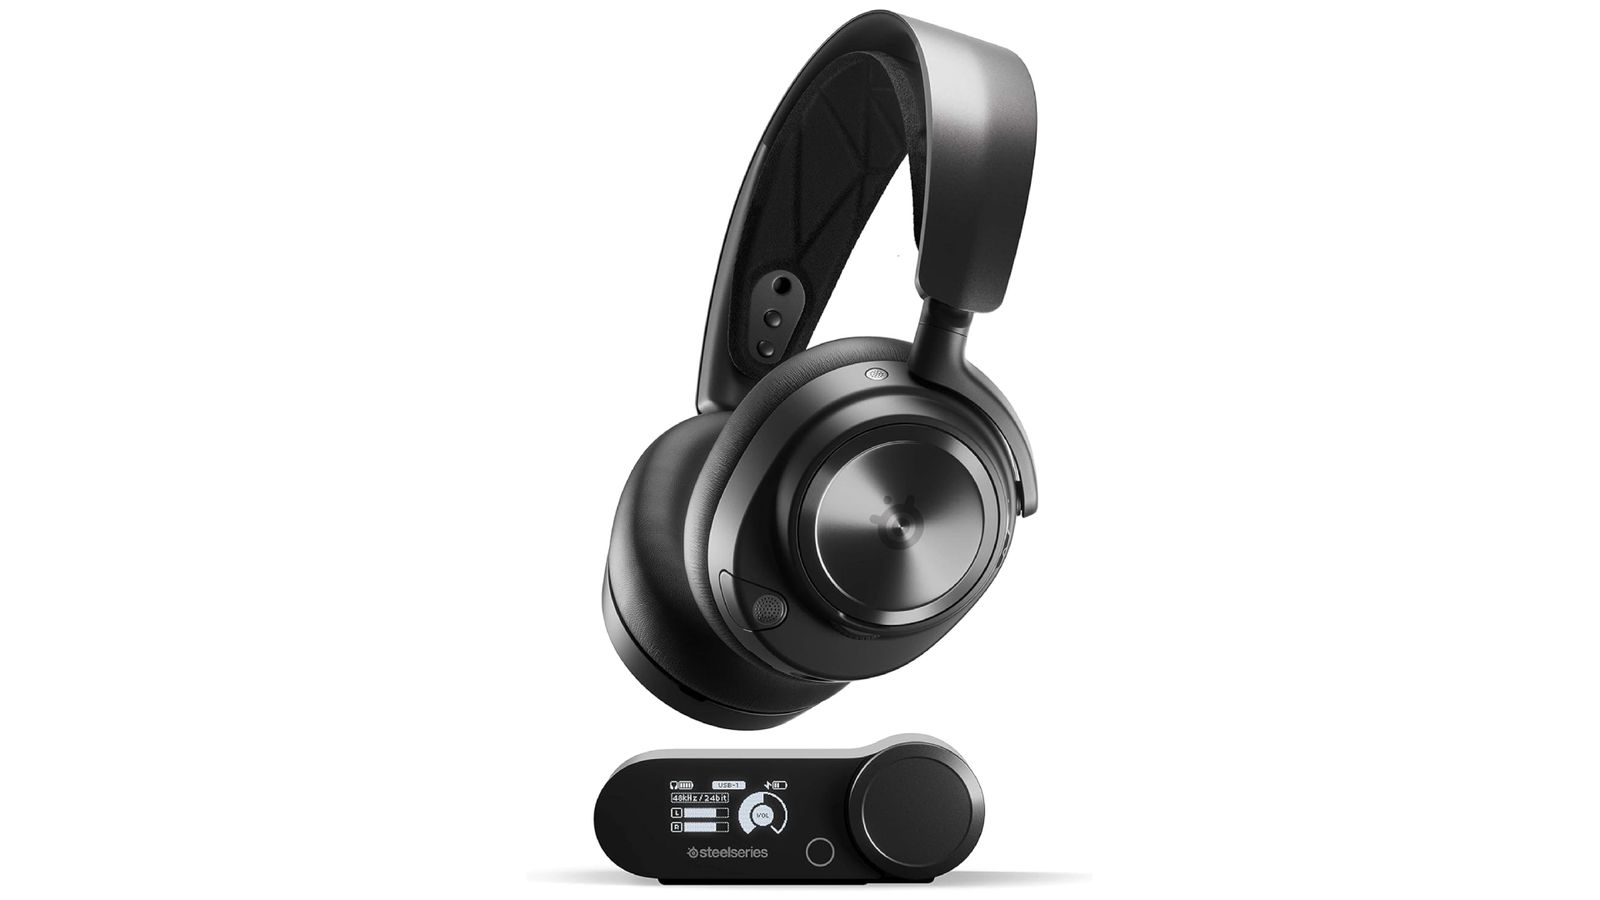 SteelSeries Arctis Nova Pro product image of a black over-ear headset with a mixer below.